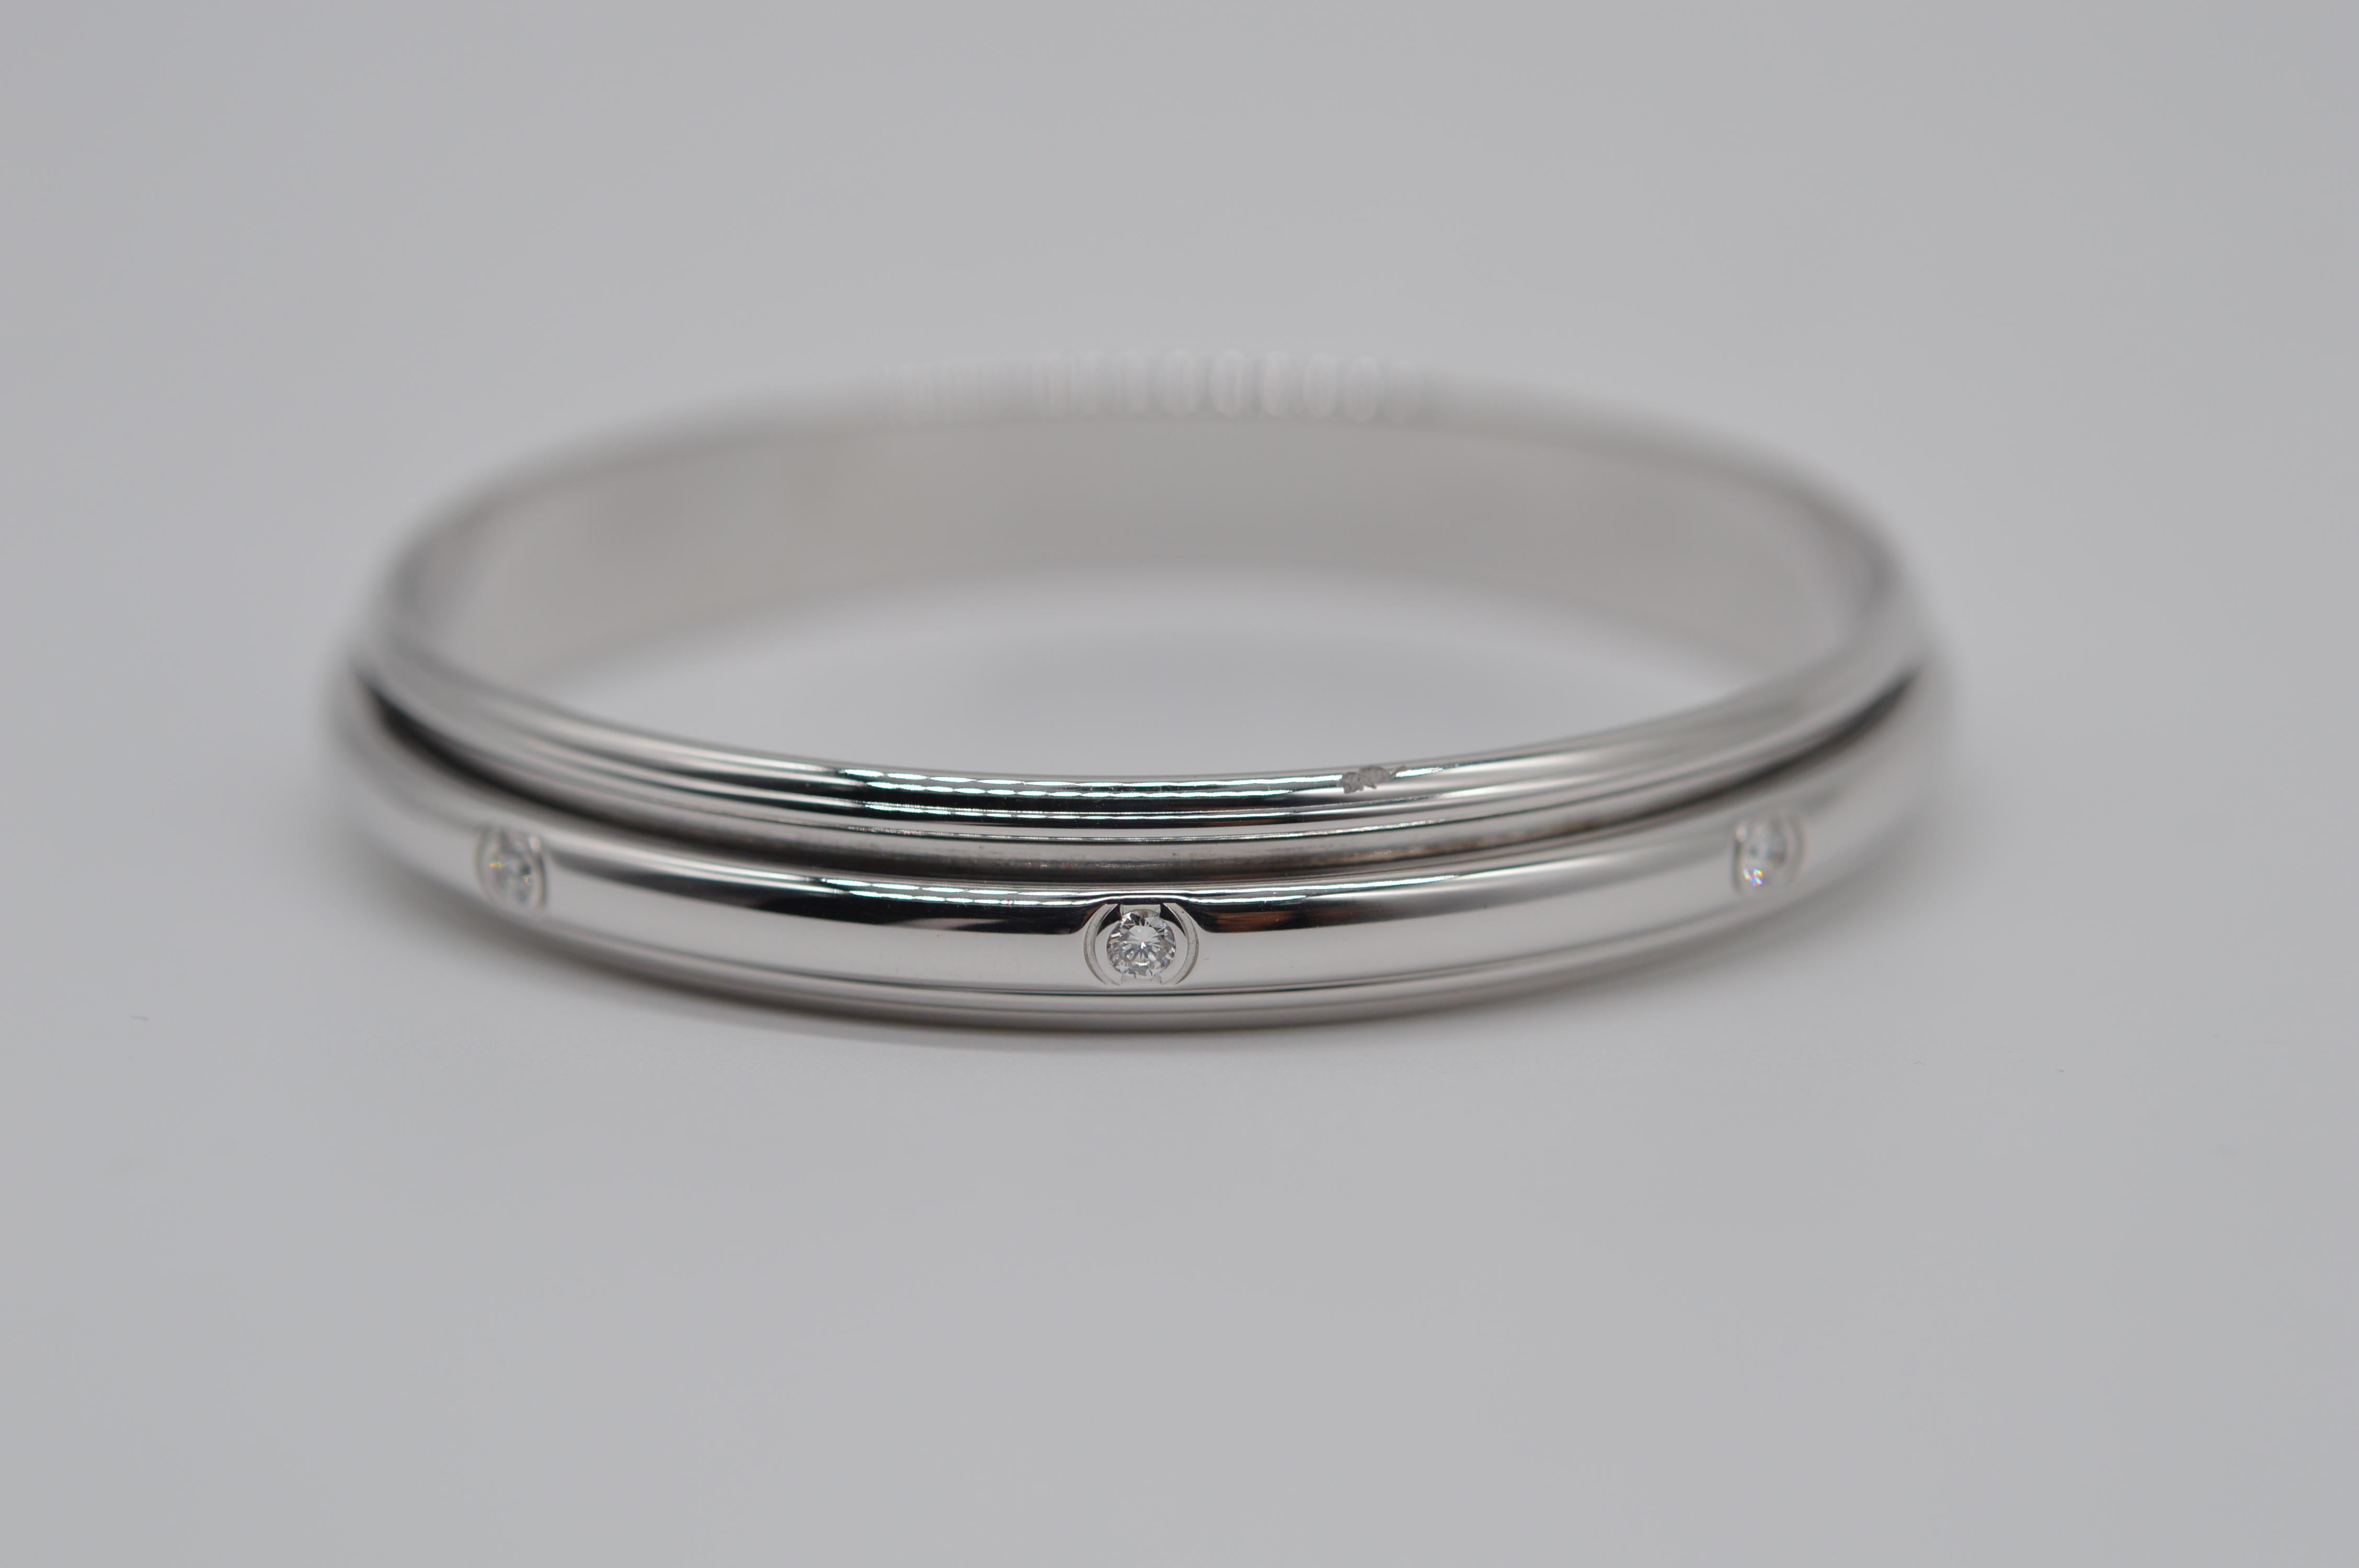 Piaget Possession Bangle Unworn
Size 65
18K White Gold
Weight 64.2 grams
Diamond Setting
Set with 8 Round Diamond for a total weight of 0.80 carats
Vintage unworn
From 1995
